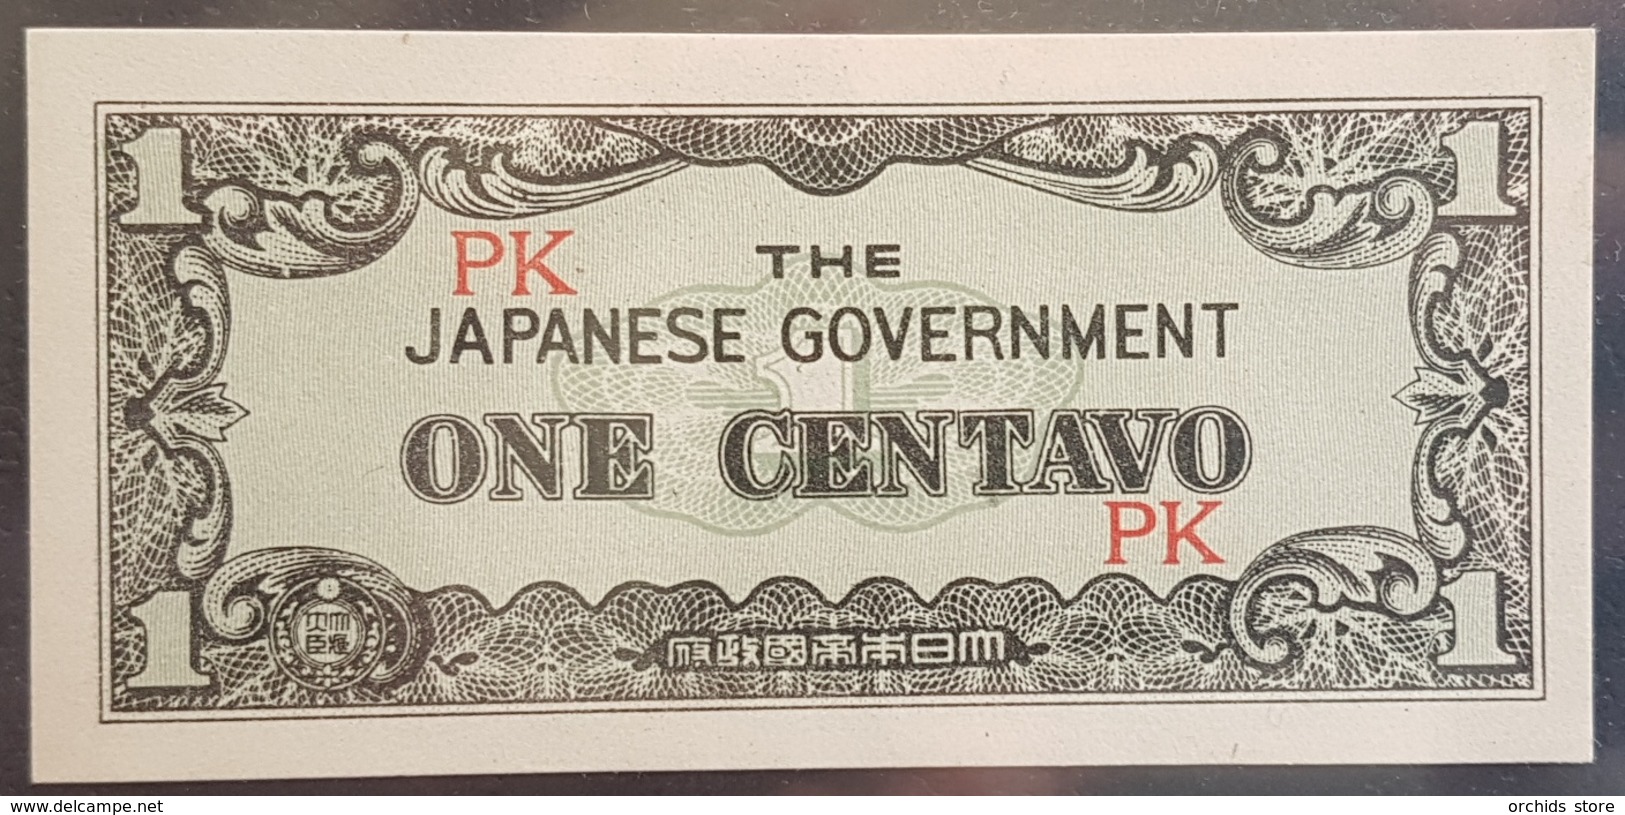 EBN7 - The Japanese Military Government In Philippines - 1942 Banknote 1 Centavo Series PK - Pick 102 - UNC - Japan